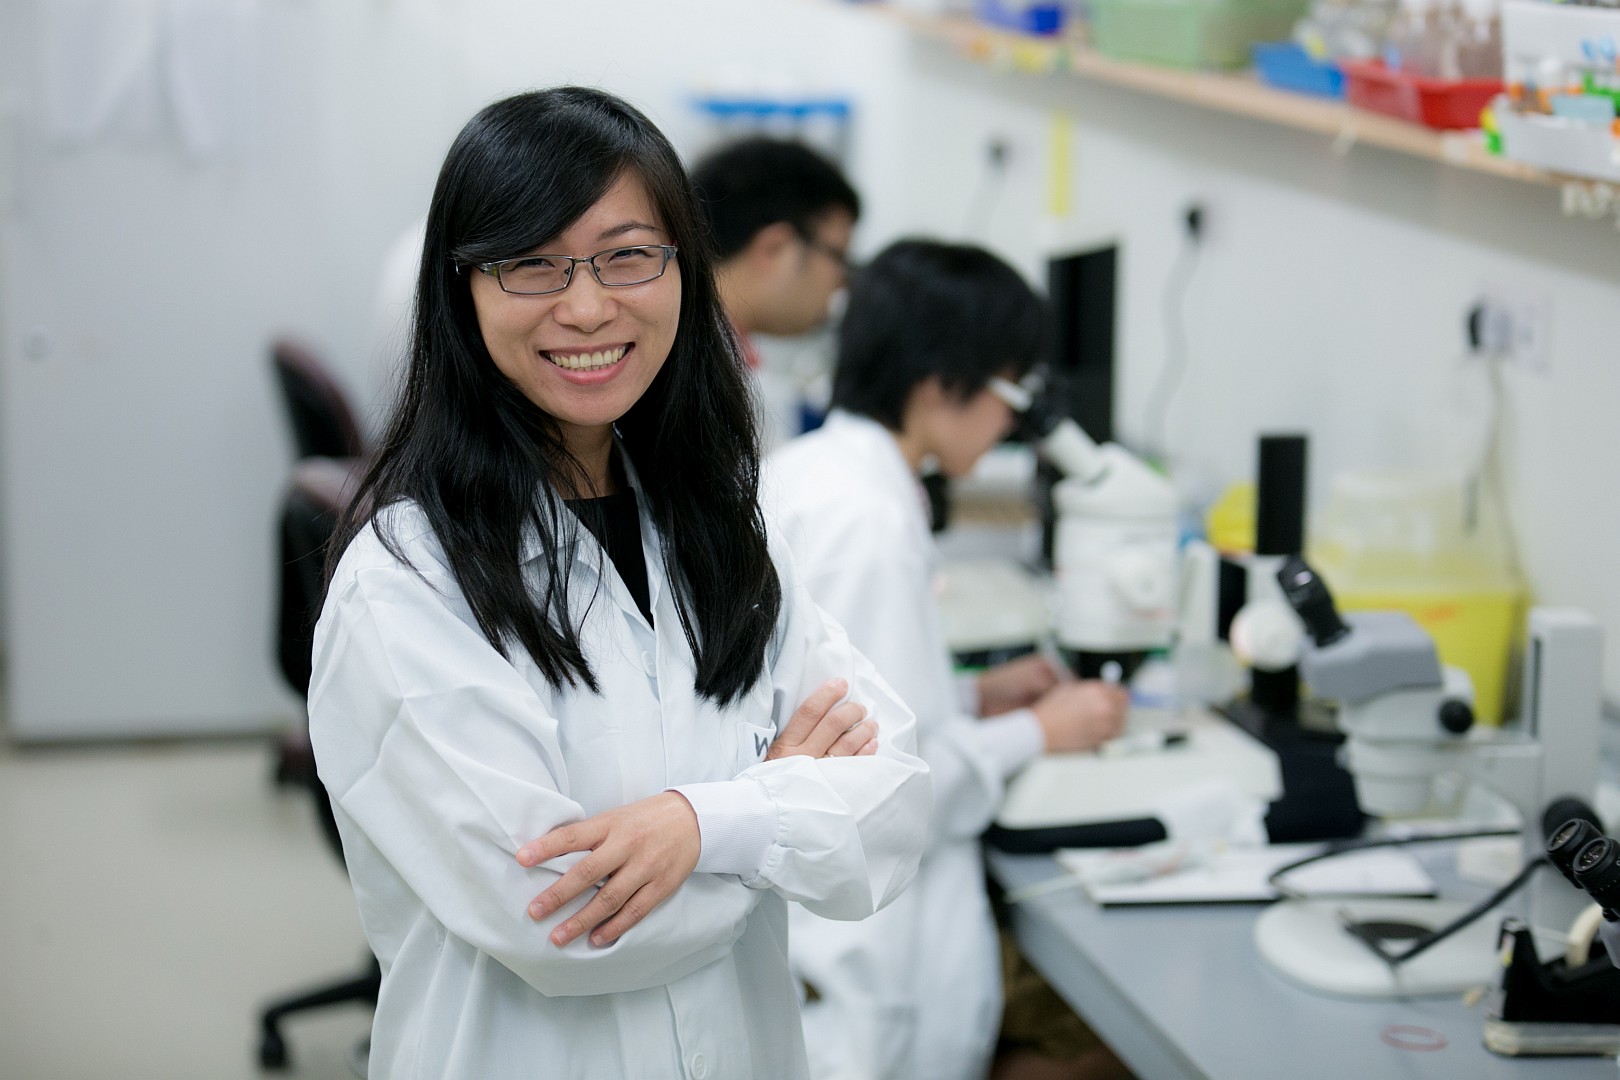 Wang in her lab in 2016 